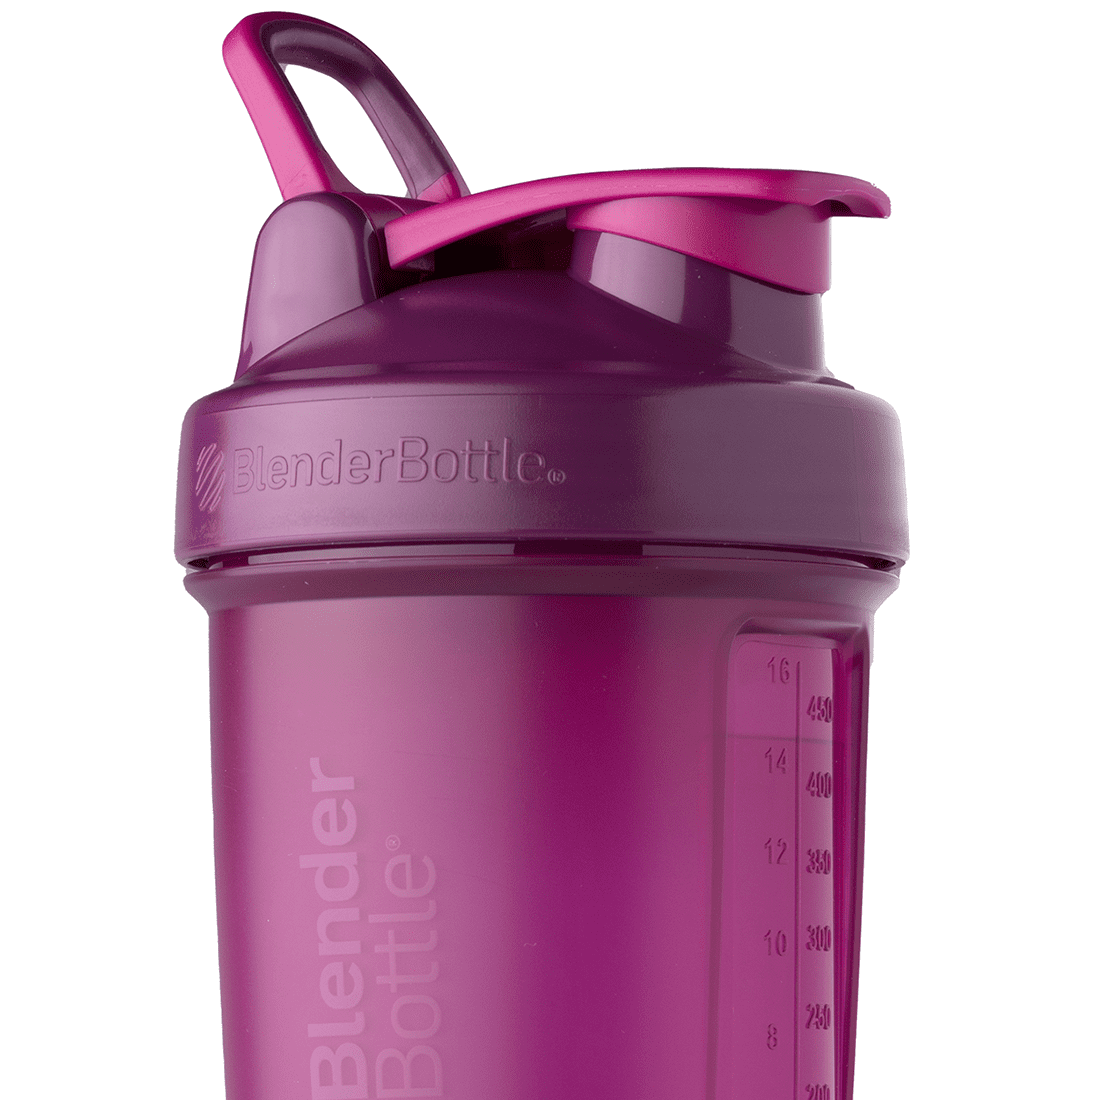 Fit Store Qatar - Blender Bottle Shaker with Pill Organizer and Storage for  Protein Powder. Size: 22-Ounce. ⠀ ❗Hurry up to buy the limited edition❗ ⠀ ⠀  #fitnessaccessoriesqatar #doha #qatar #dohagirls #sportequipmentqatar #